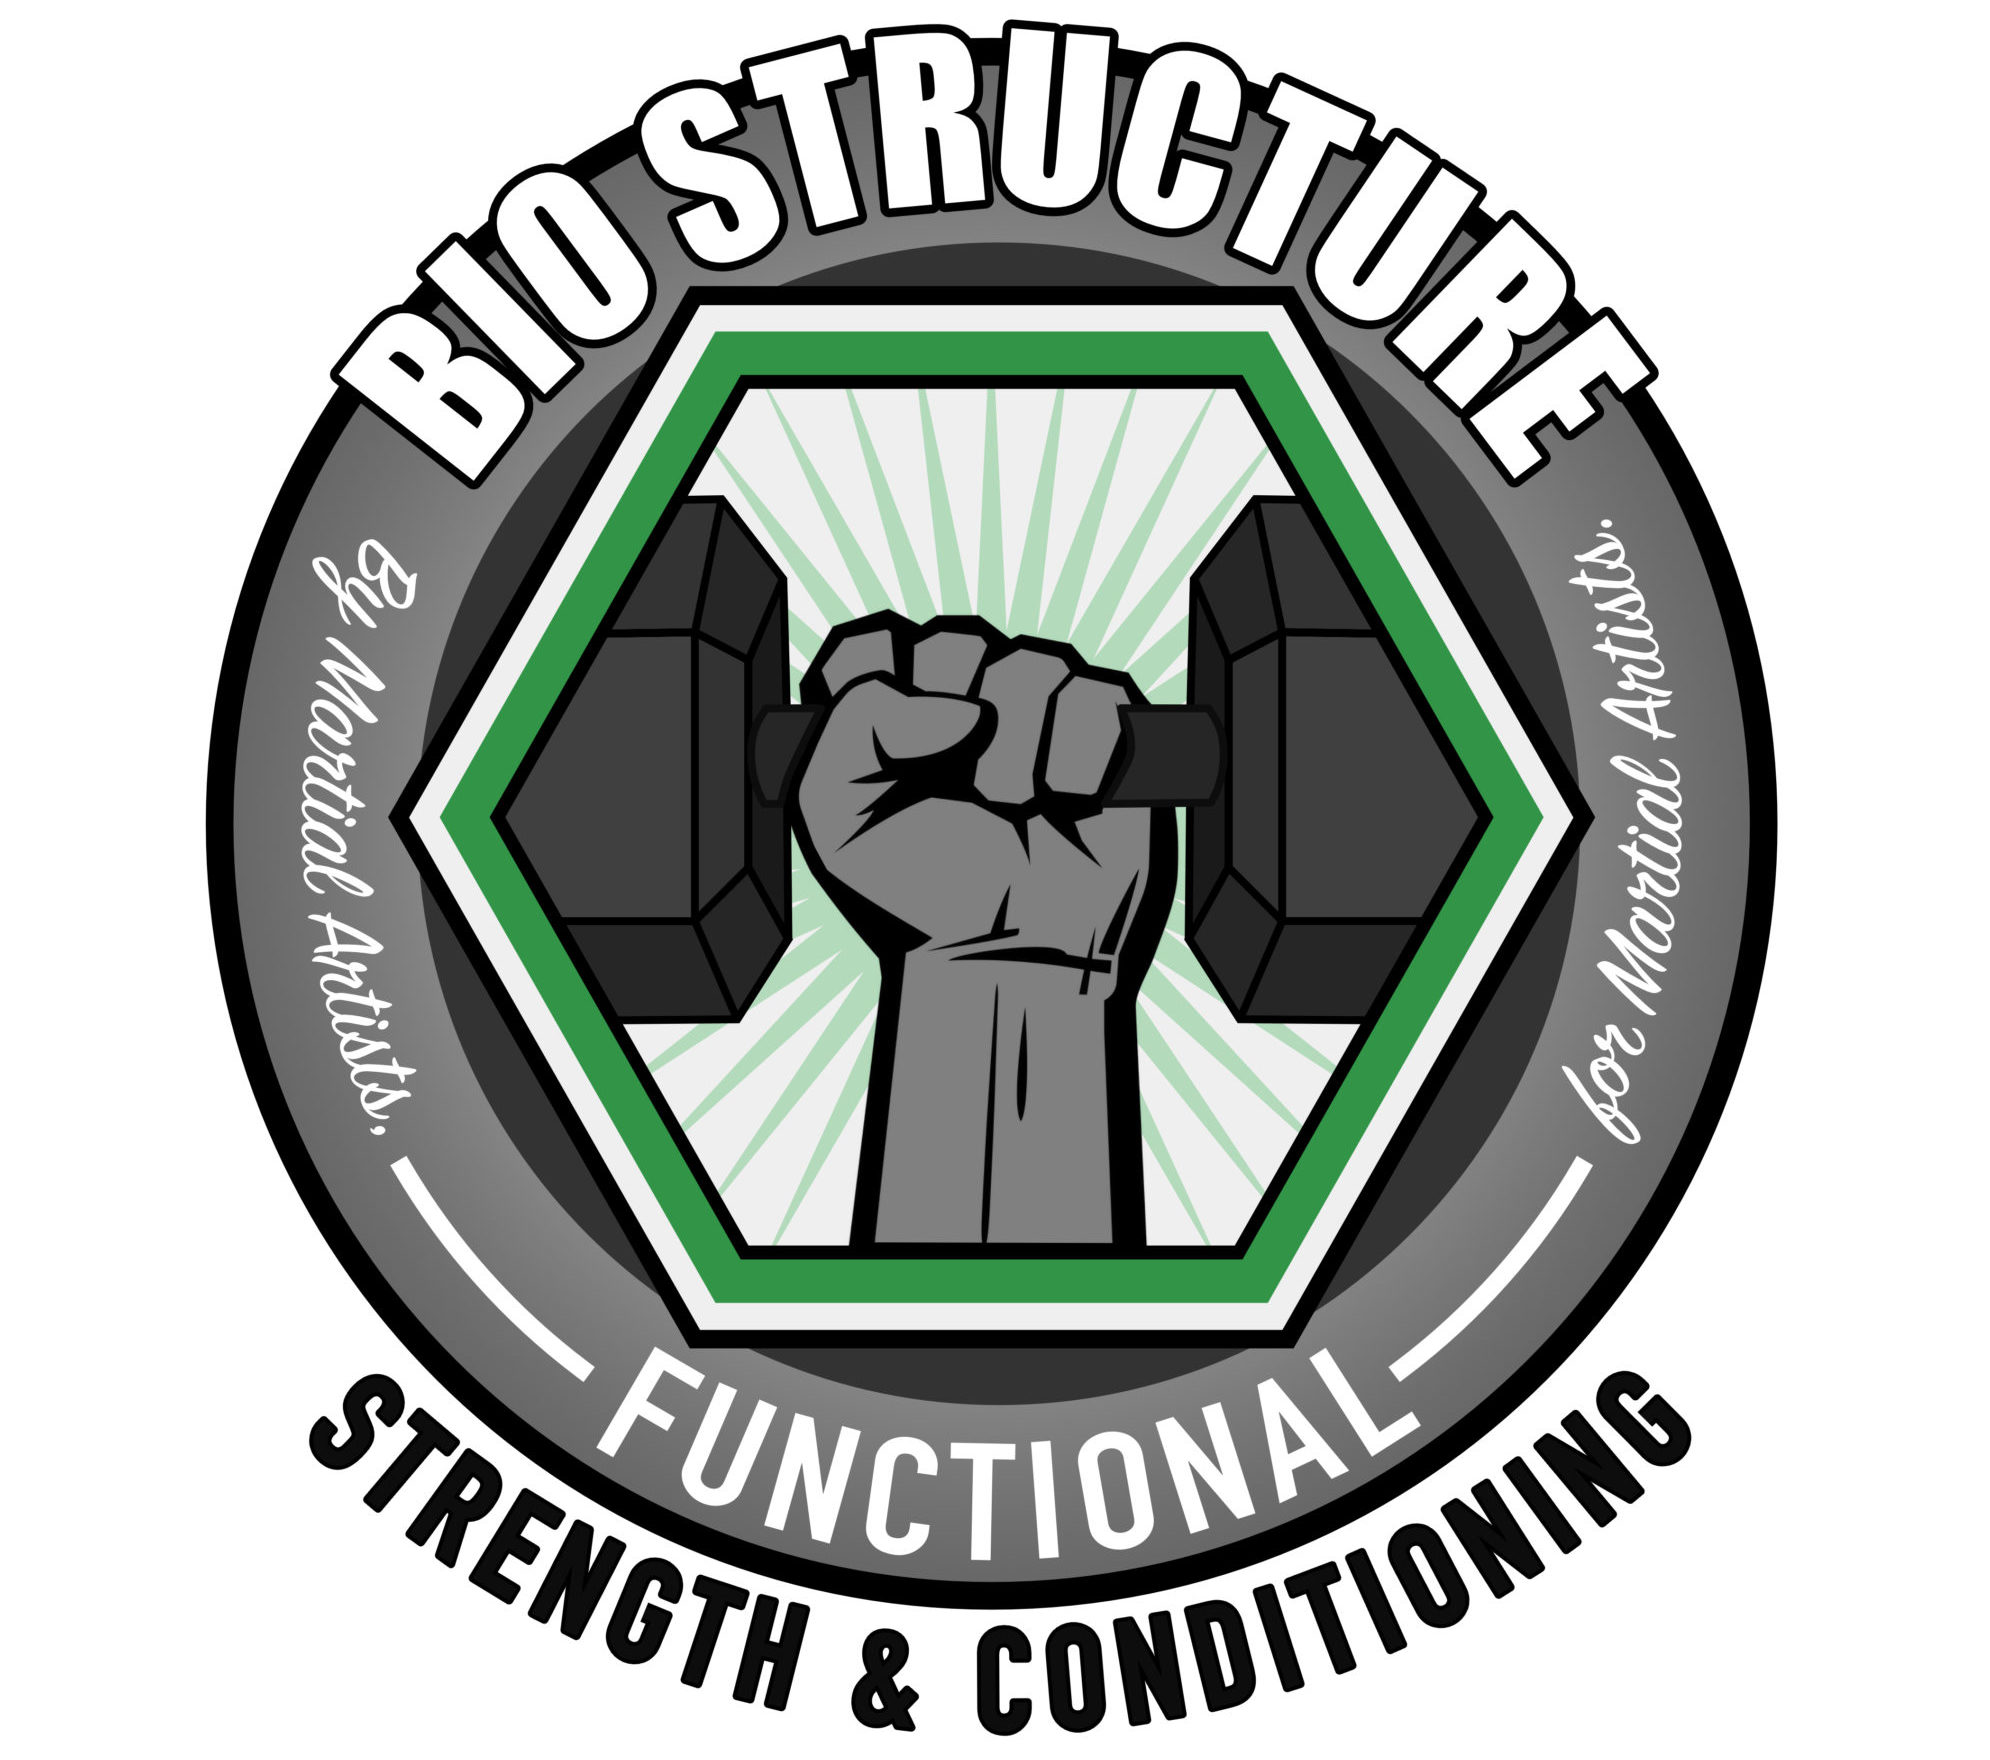 The Five Fingers of Functional Fitness